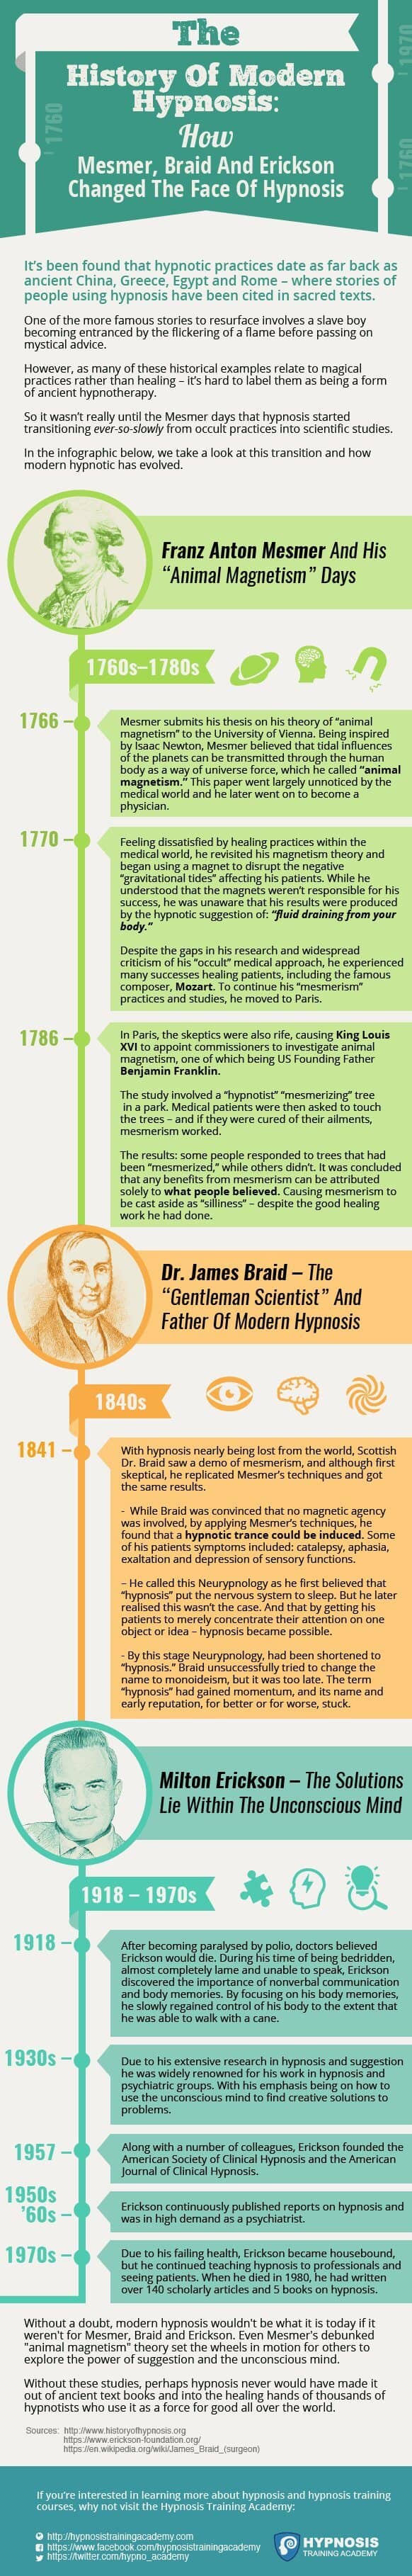 history of hypnosis infographic